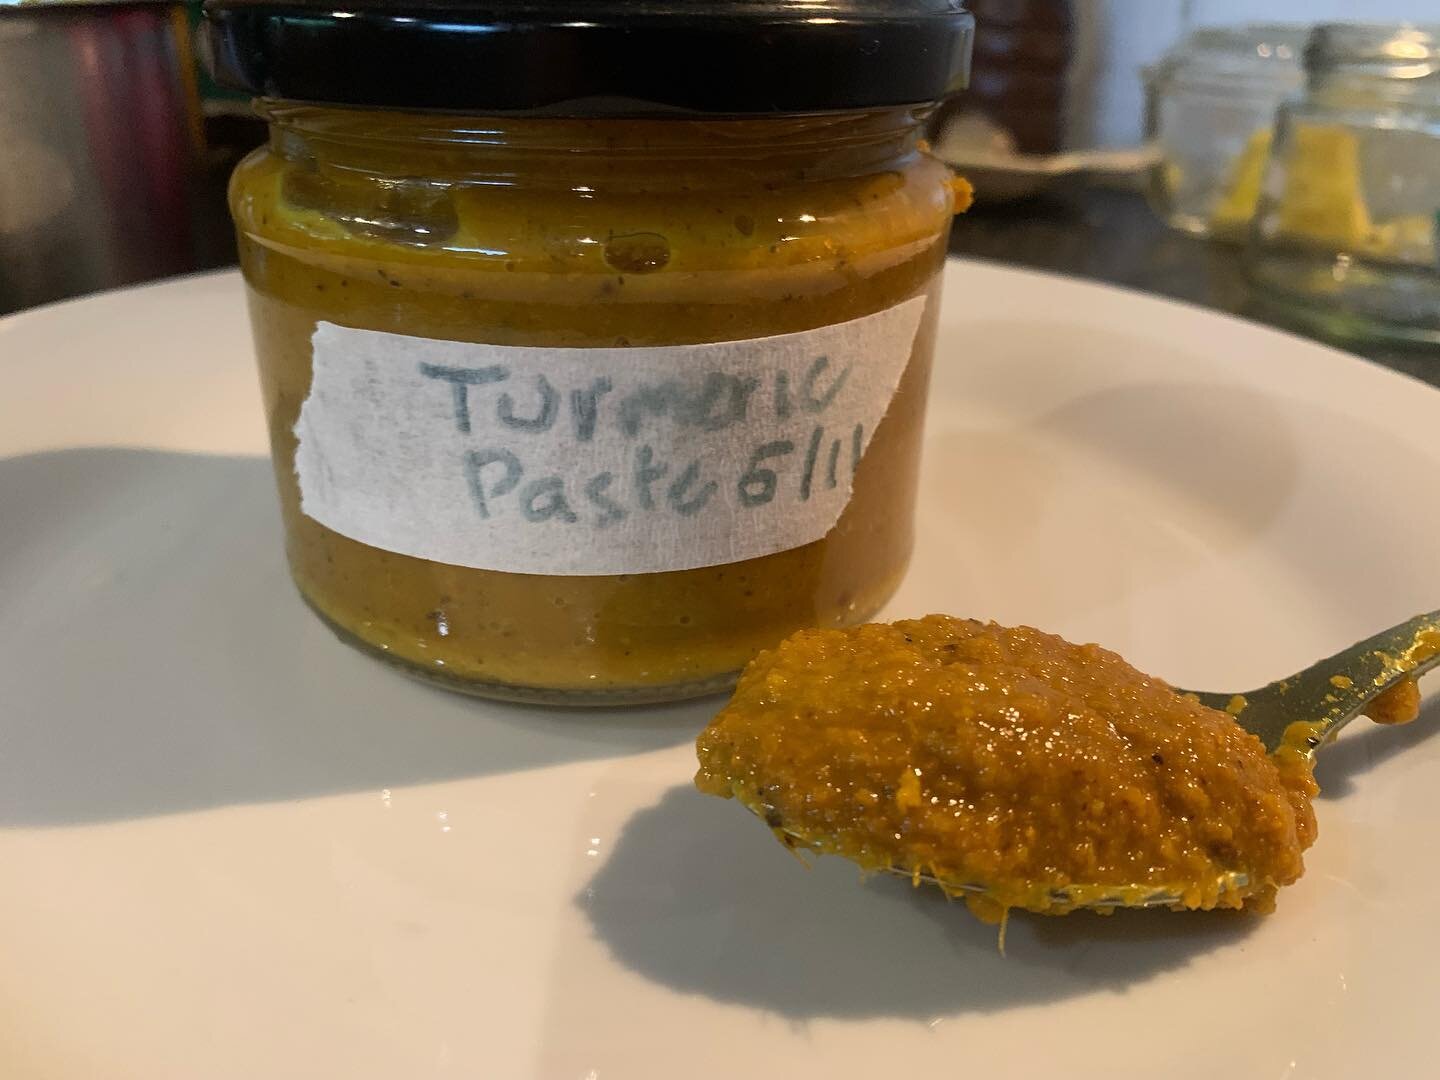 My first home made turmeric paste. Home grown turmeric and ginger. Packs a punch and so yummy. #turmeric #goldenpaste #growyouownmedicine